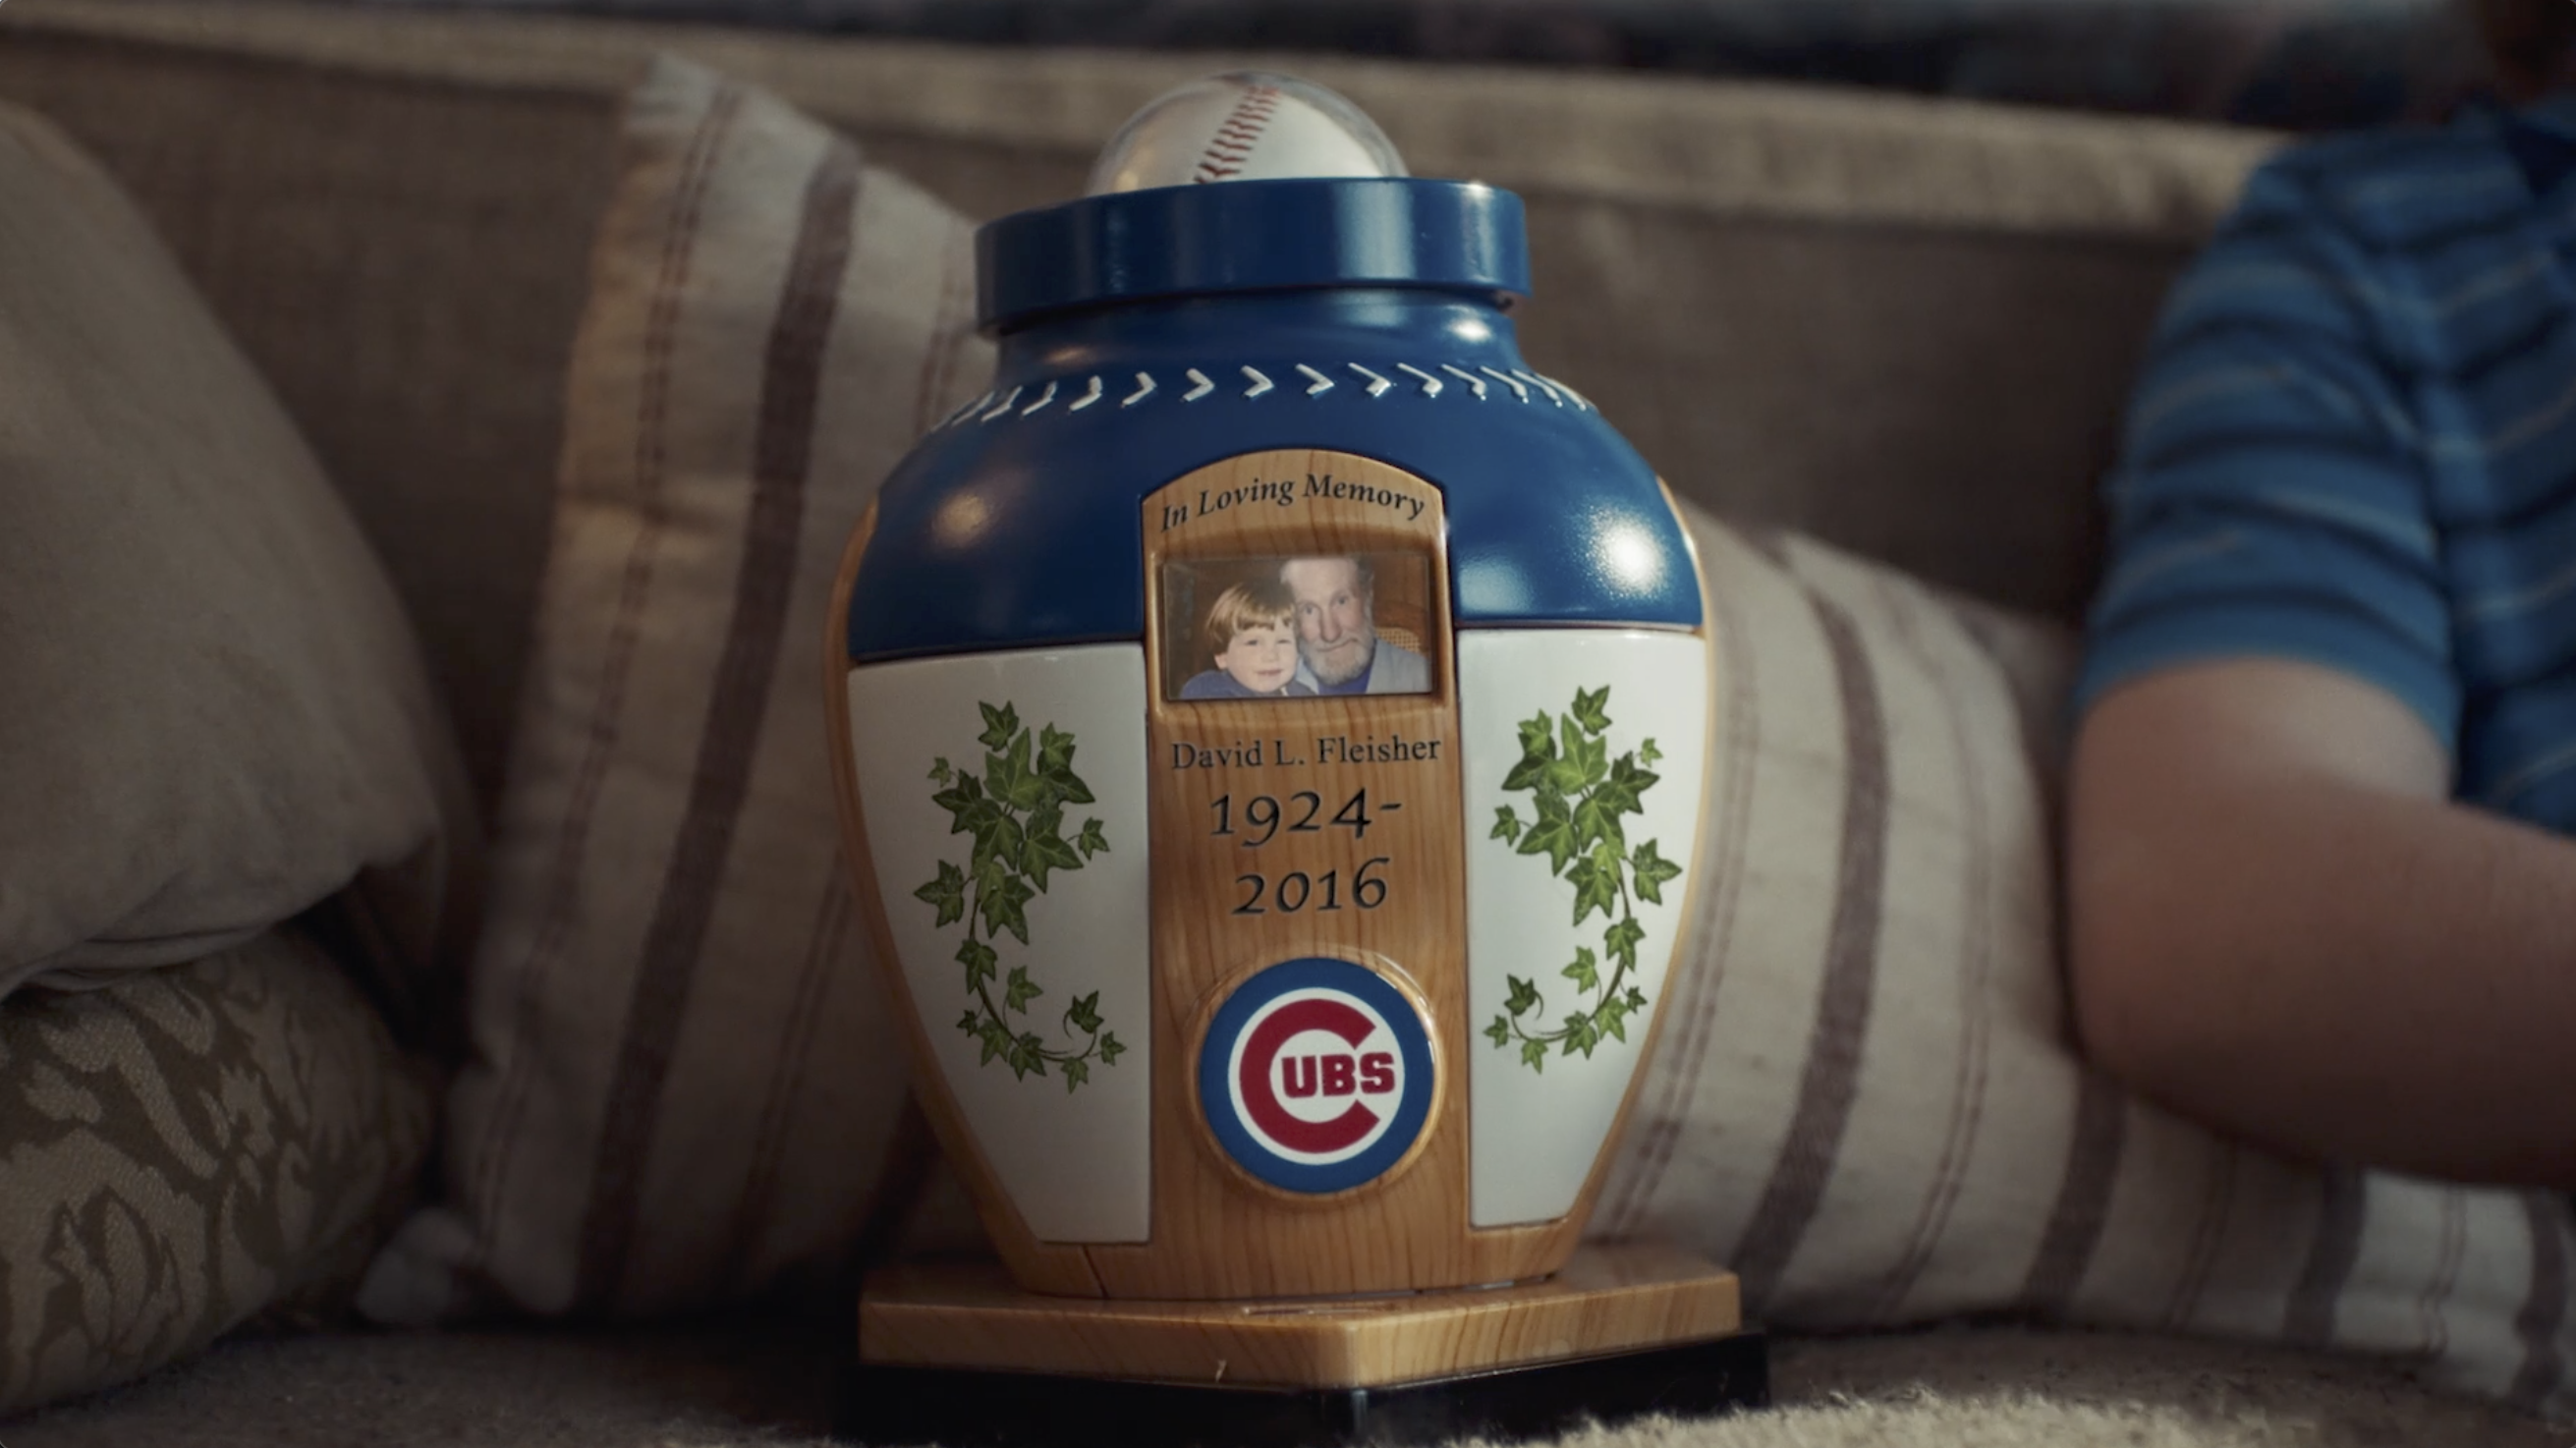 New Chicago Cubs TV Network Wants Cub Fans to Know They 'Get It'